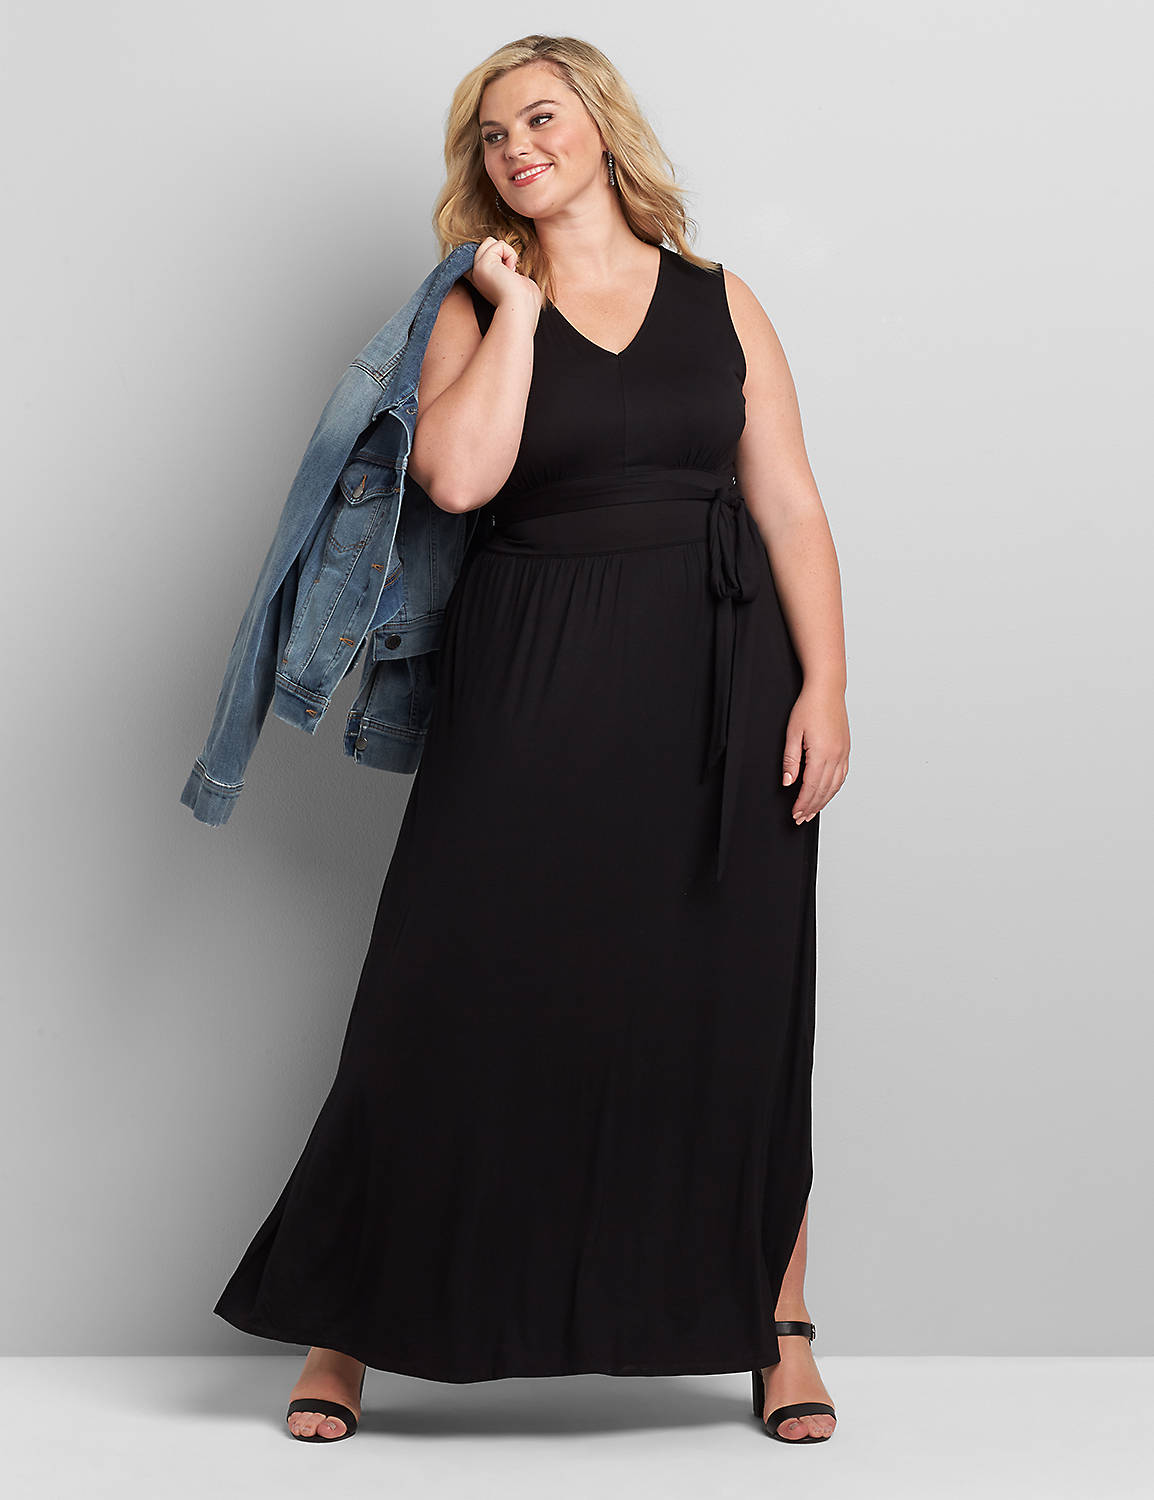 Sleeveless Vneck Maxi Belted Rayon Span Dress 1116752:Pitch Black LB 1000322:18/20 Product Image 1